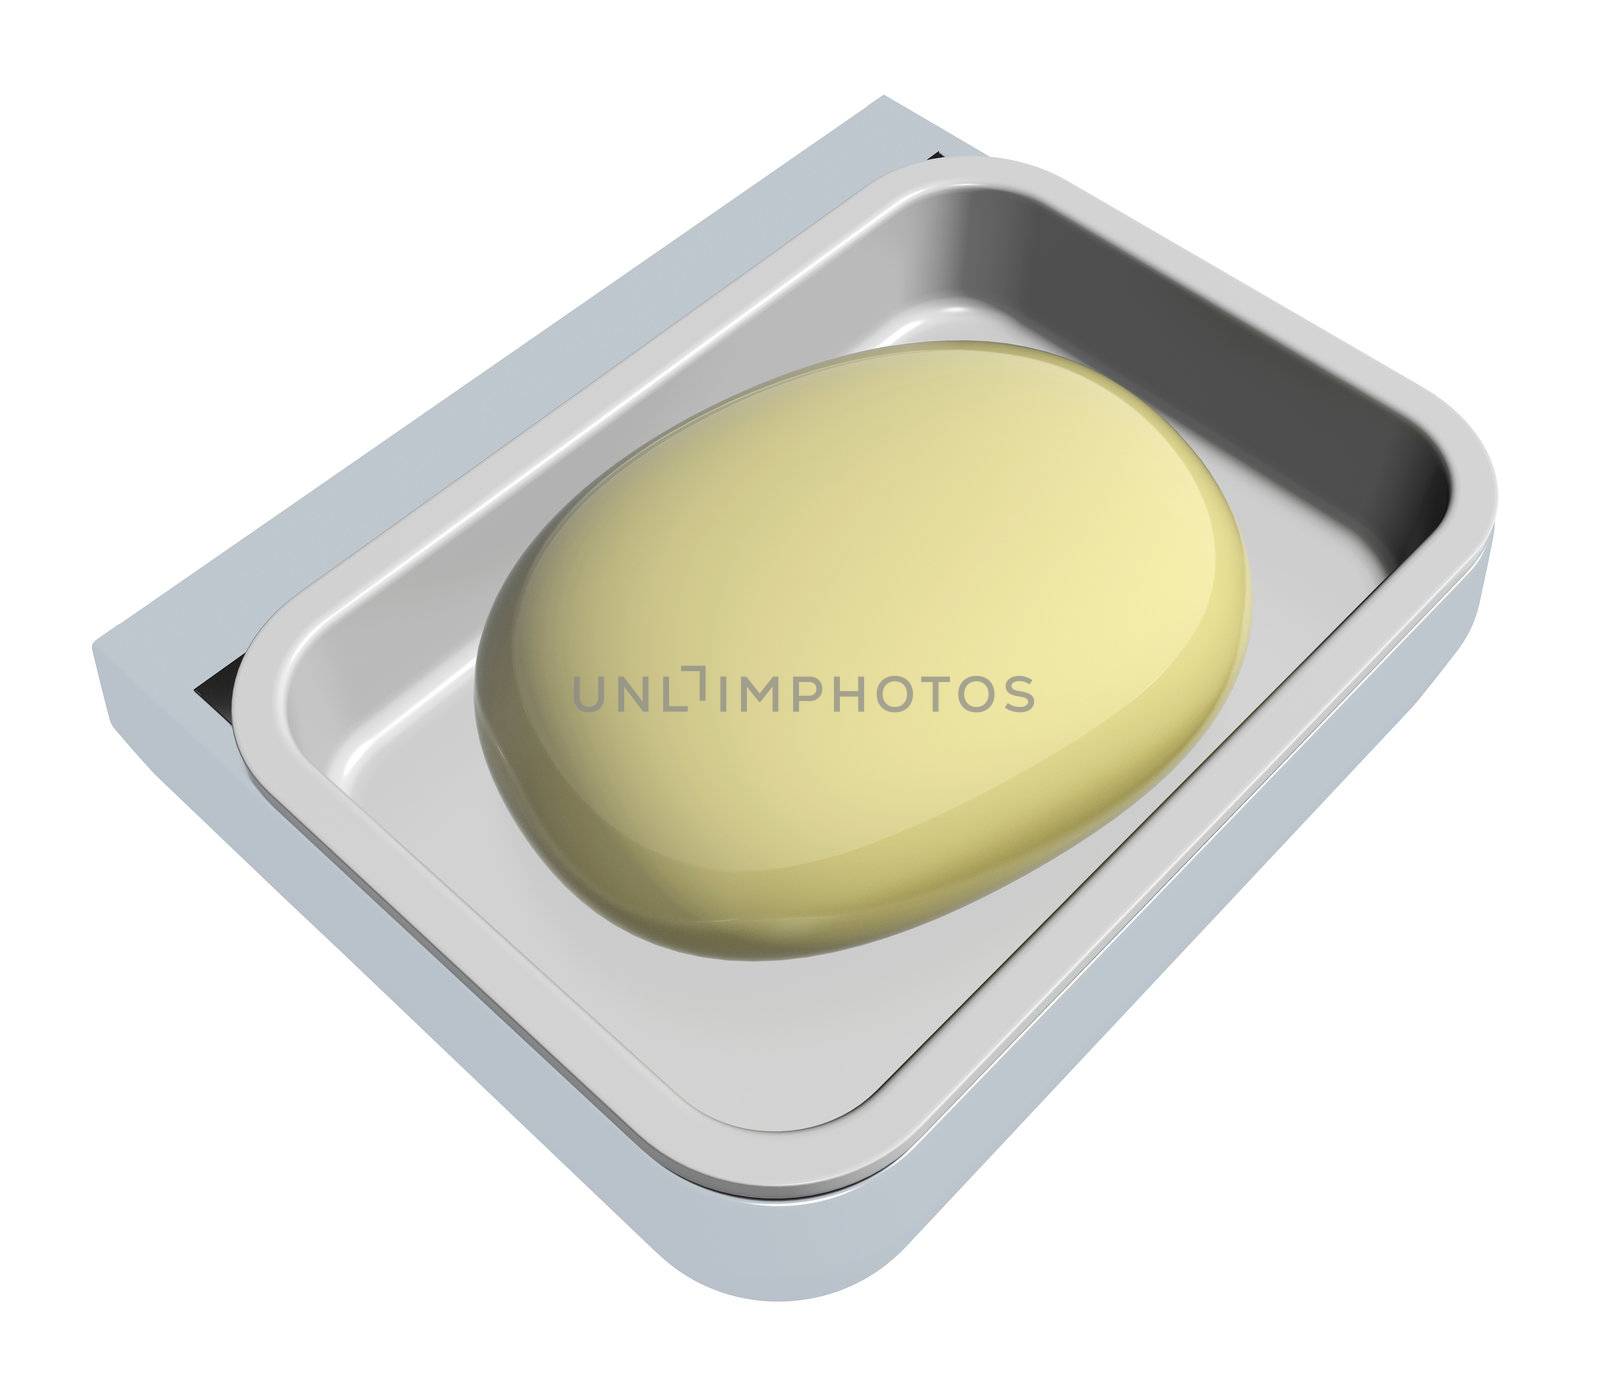 Cream colored soap in a soap holder or container, isolated against a white background